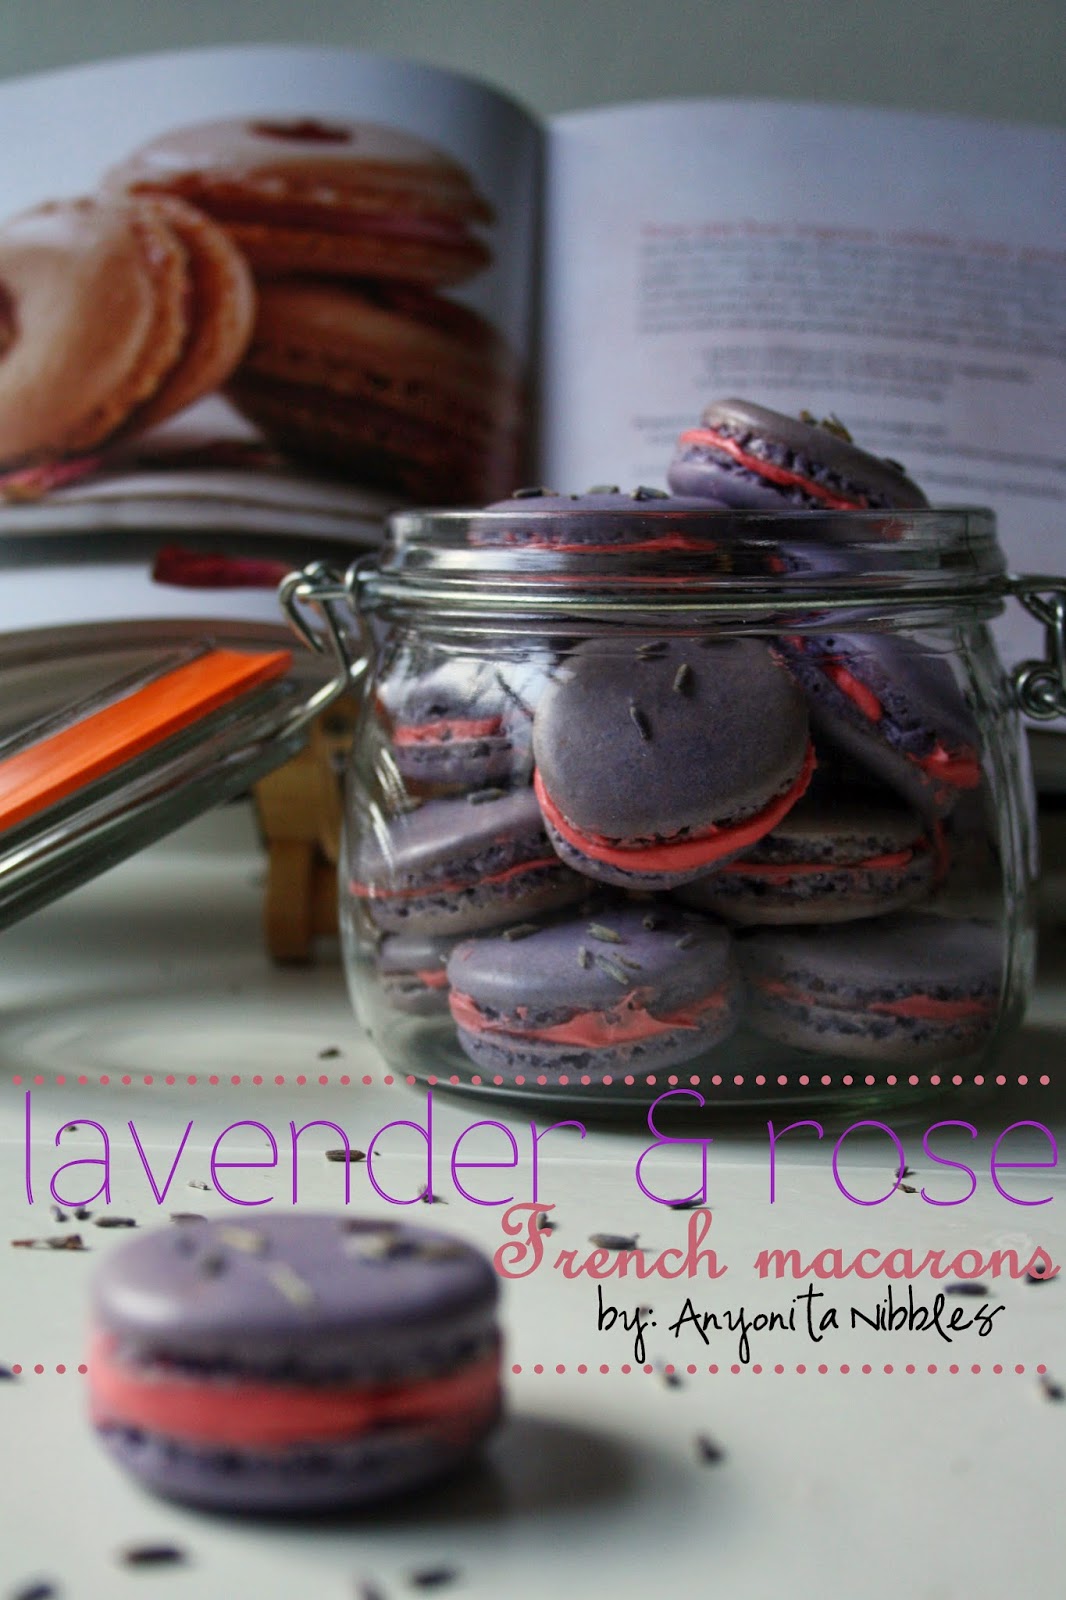 These lavender and rose #macarons from @anyonita would make an excellent #Mother'sDay gift! Pacakage them in a lovely box or jar for a pretty present.